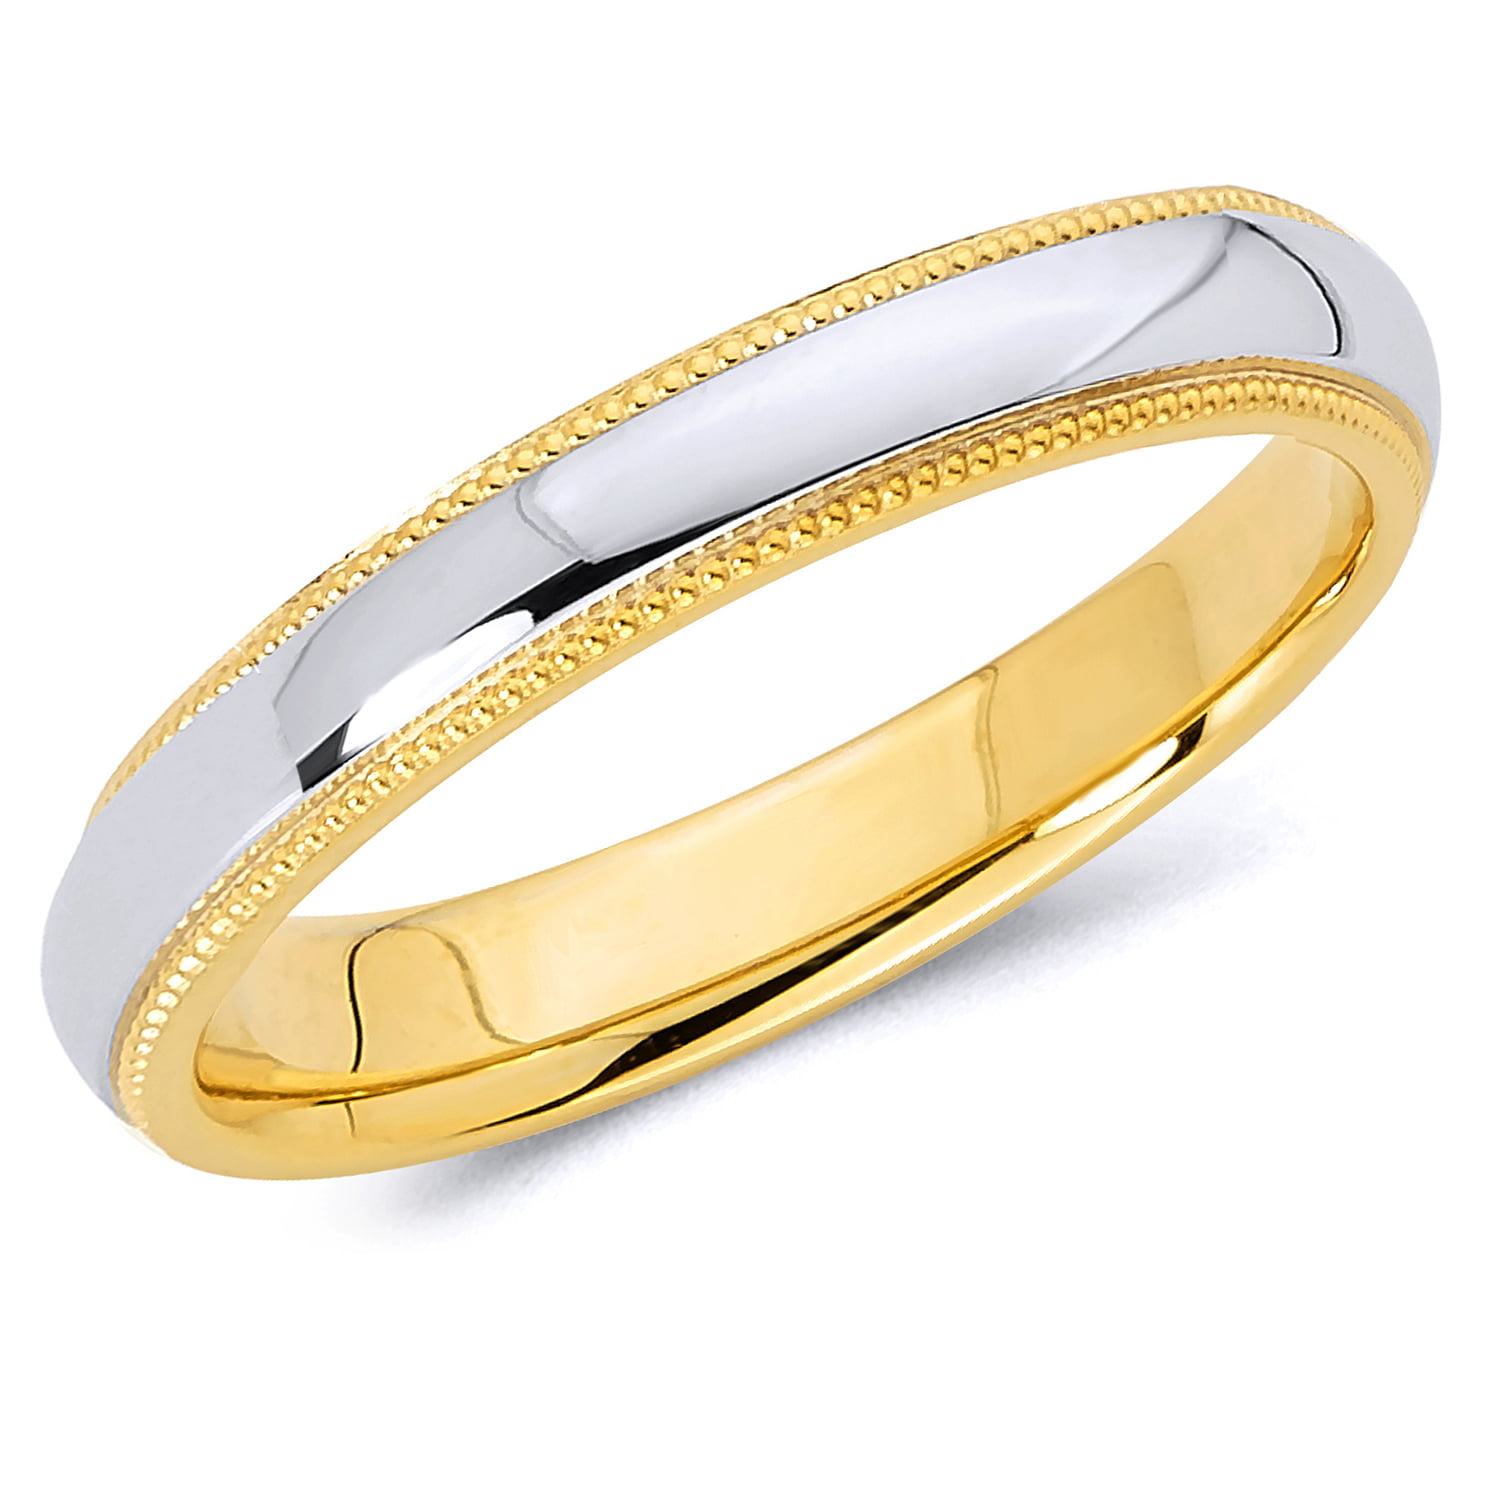 Wellingsale 14k Two 2 Tone White and Yellow Gold Polished 4MM Domed Center Milgrain Comfort Fit Wedding Band Ring